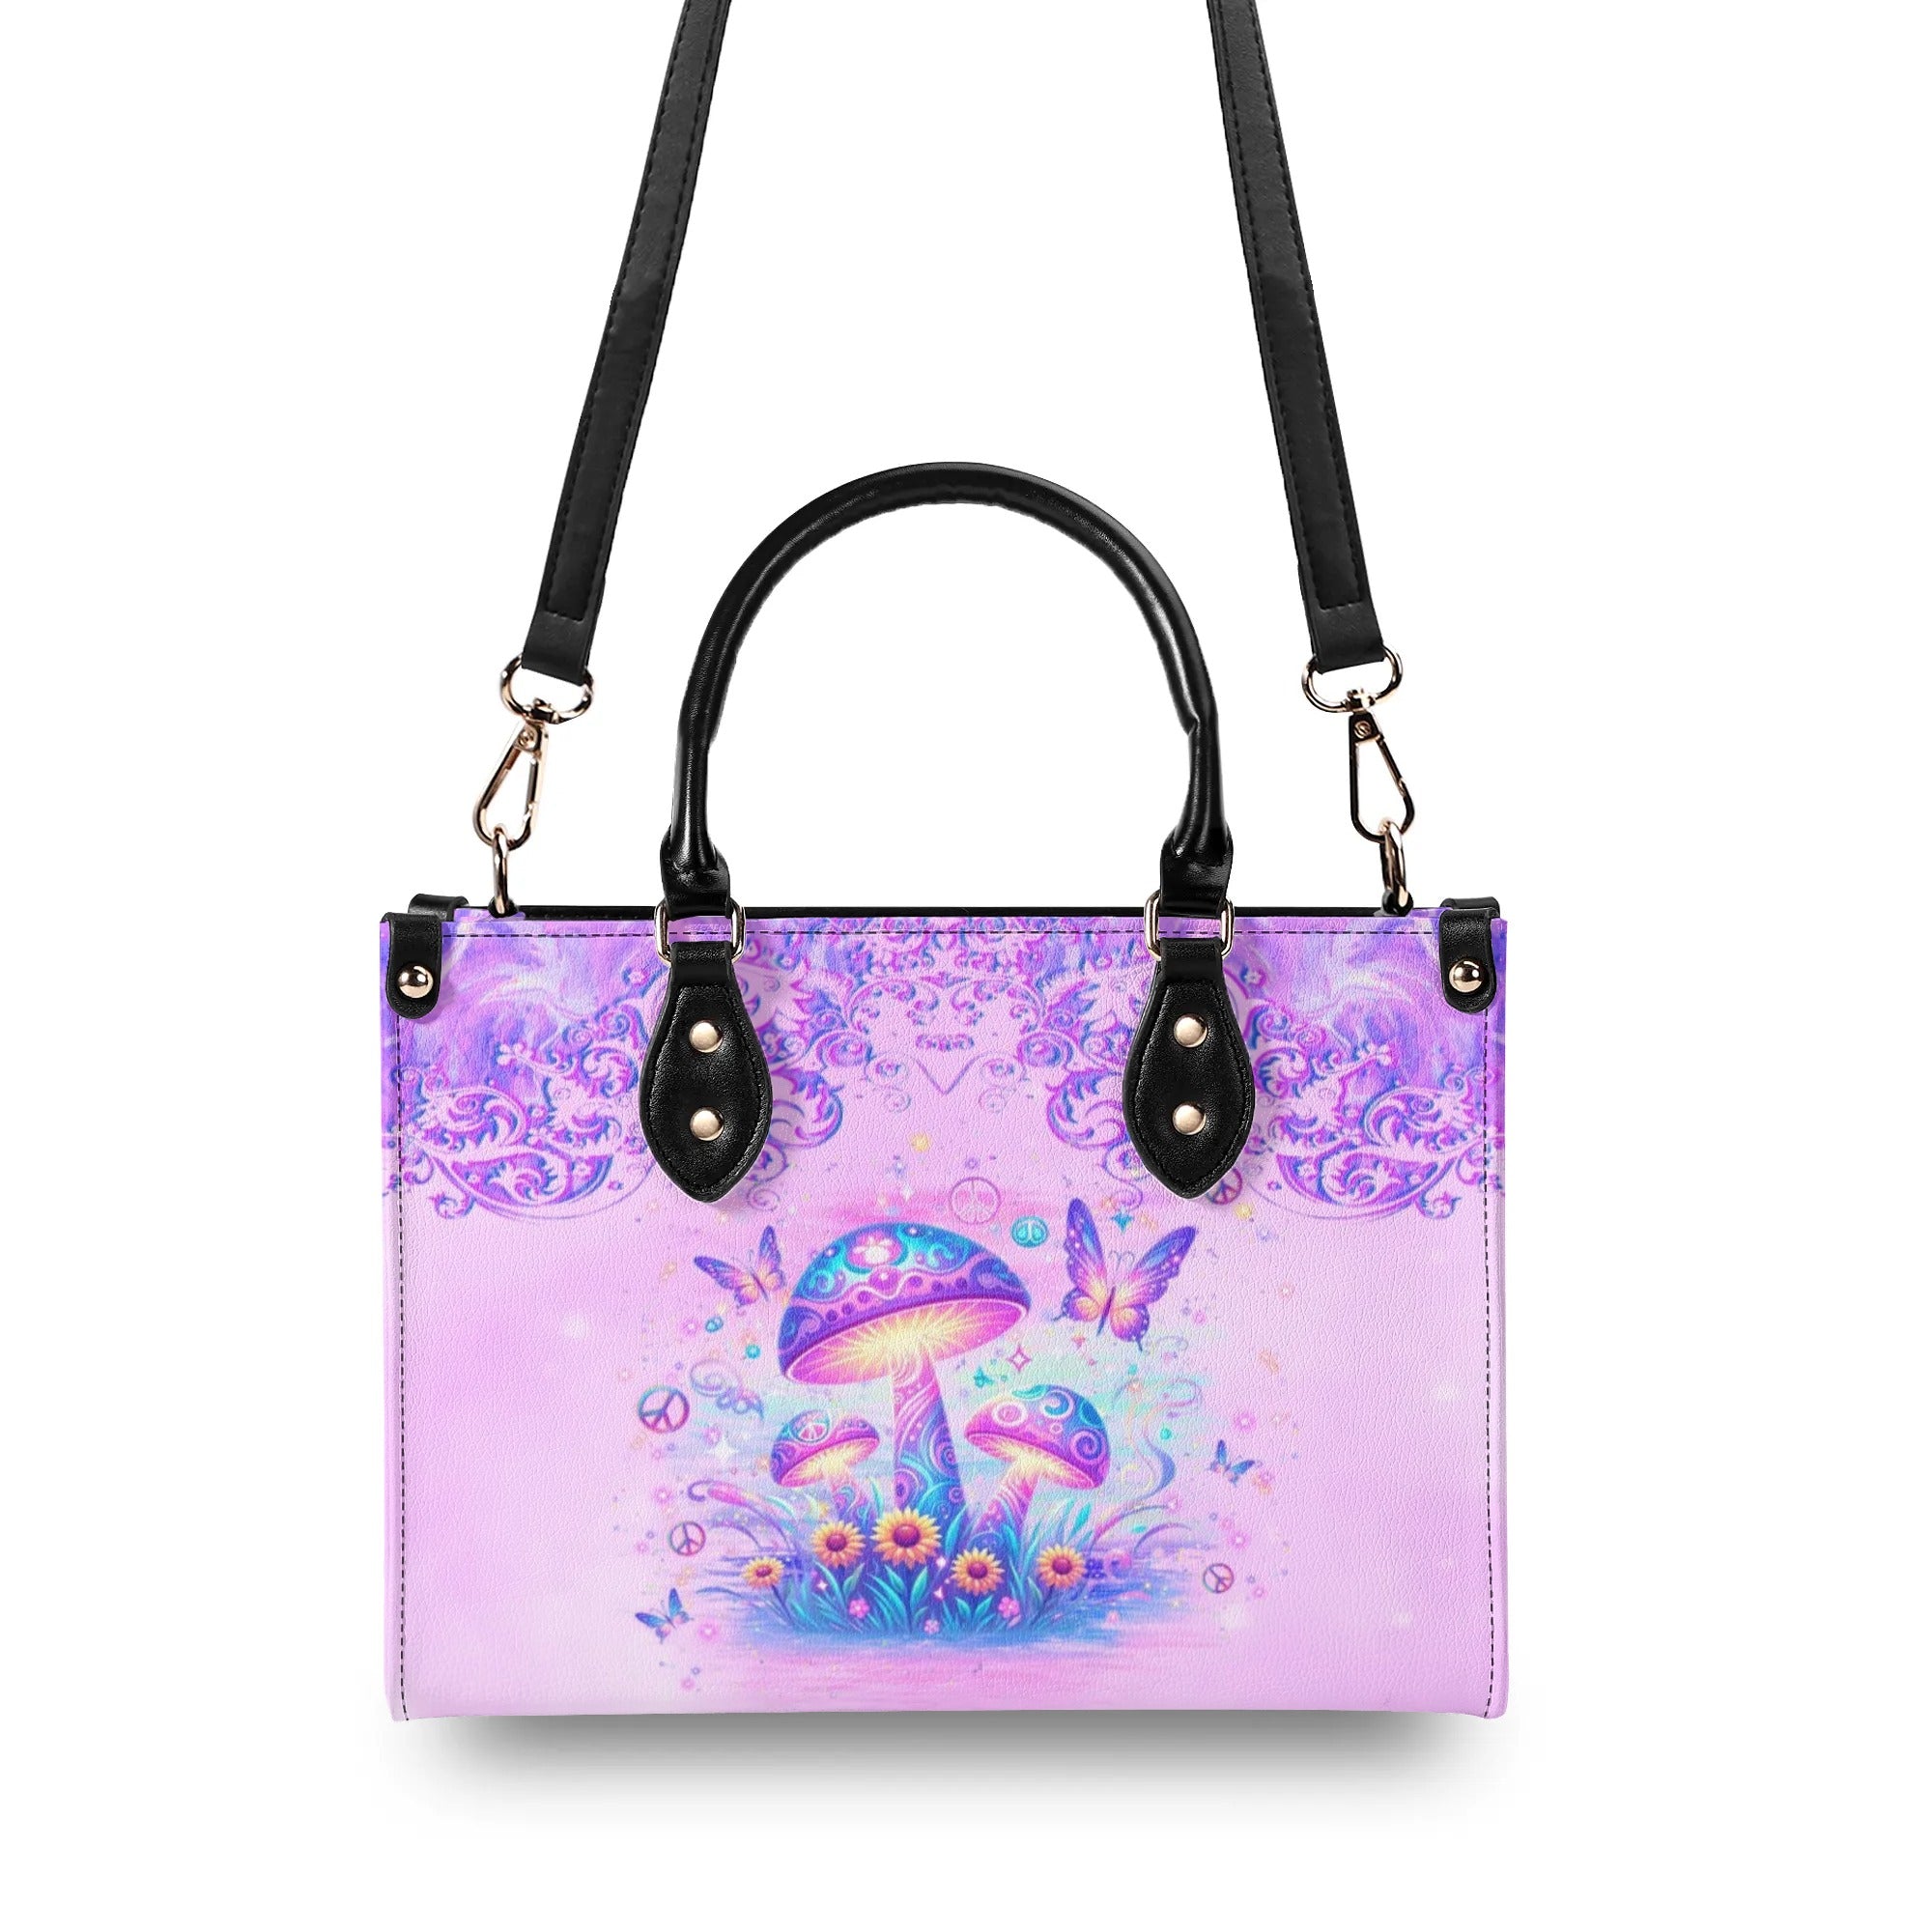 I BELIEVE THERE ARE ANGELS AMONG US LEATHER HANDBAG - YHLN2705241